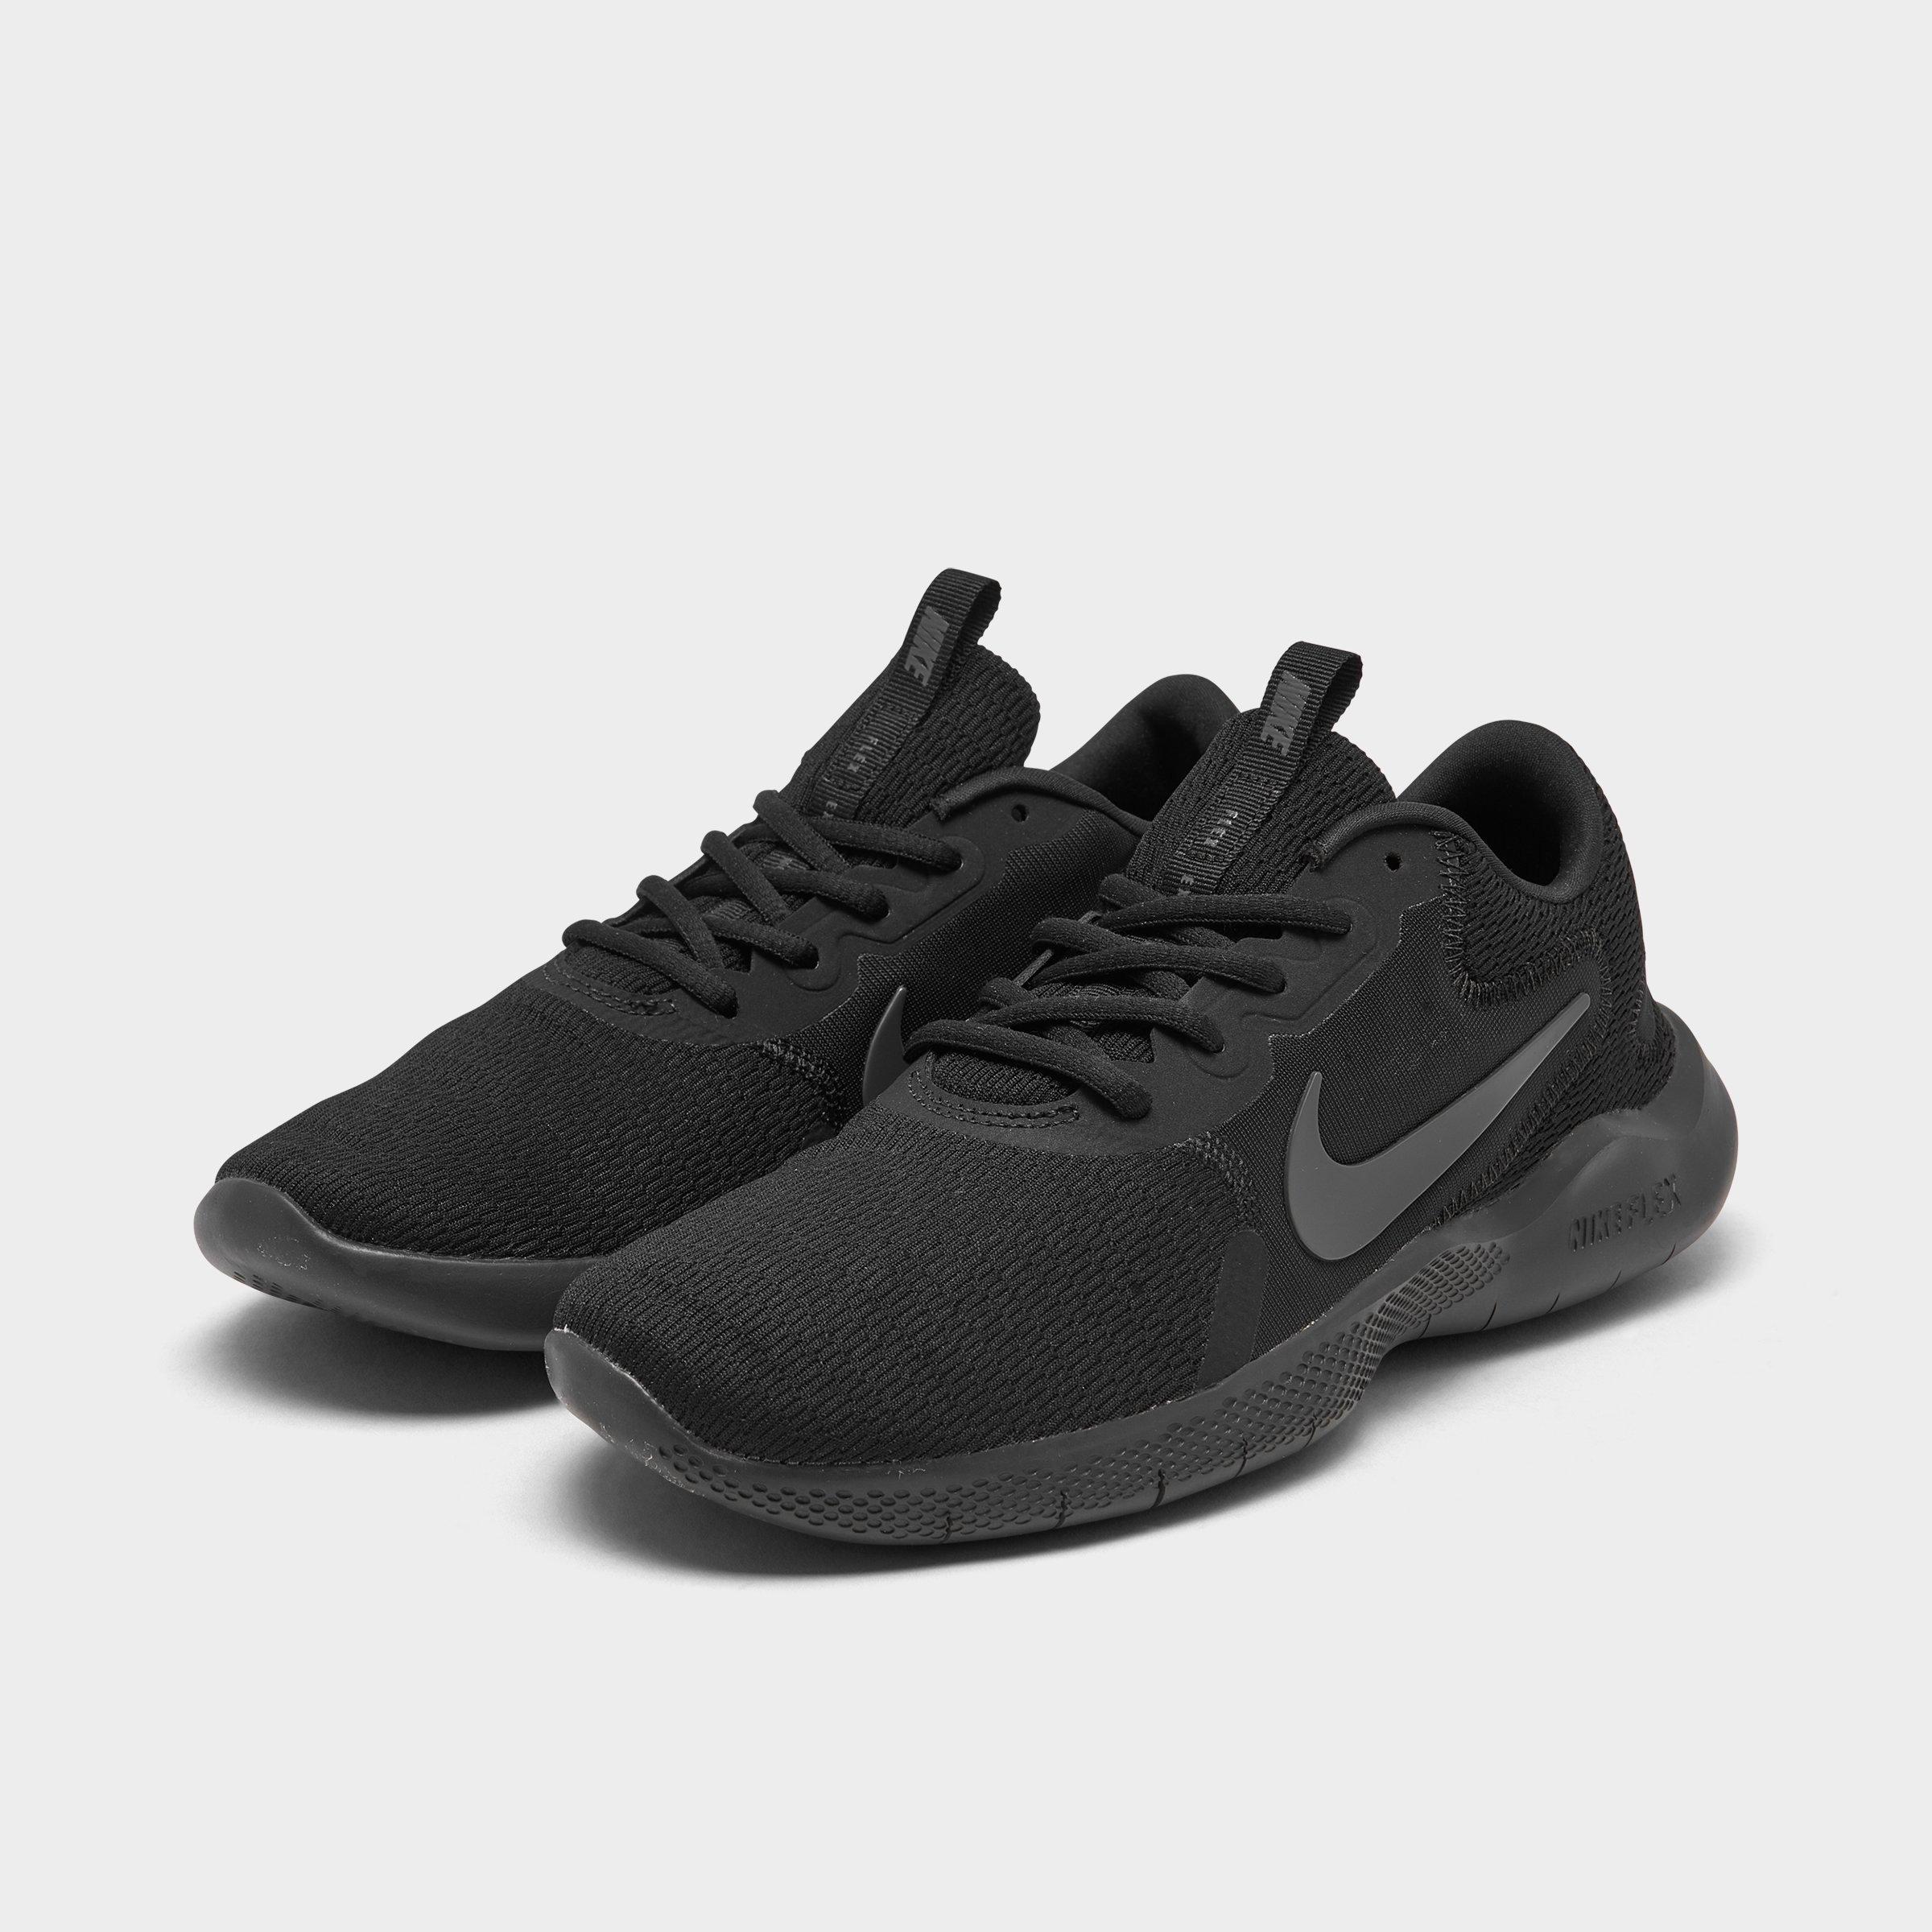 nike men's flex experience running sneakers from finish line